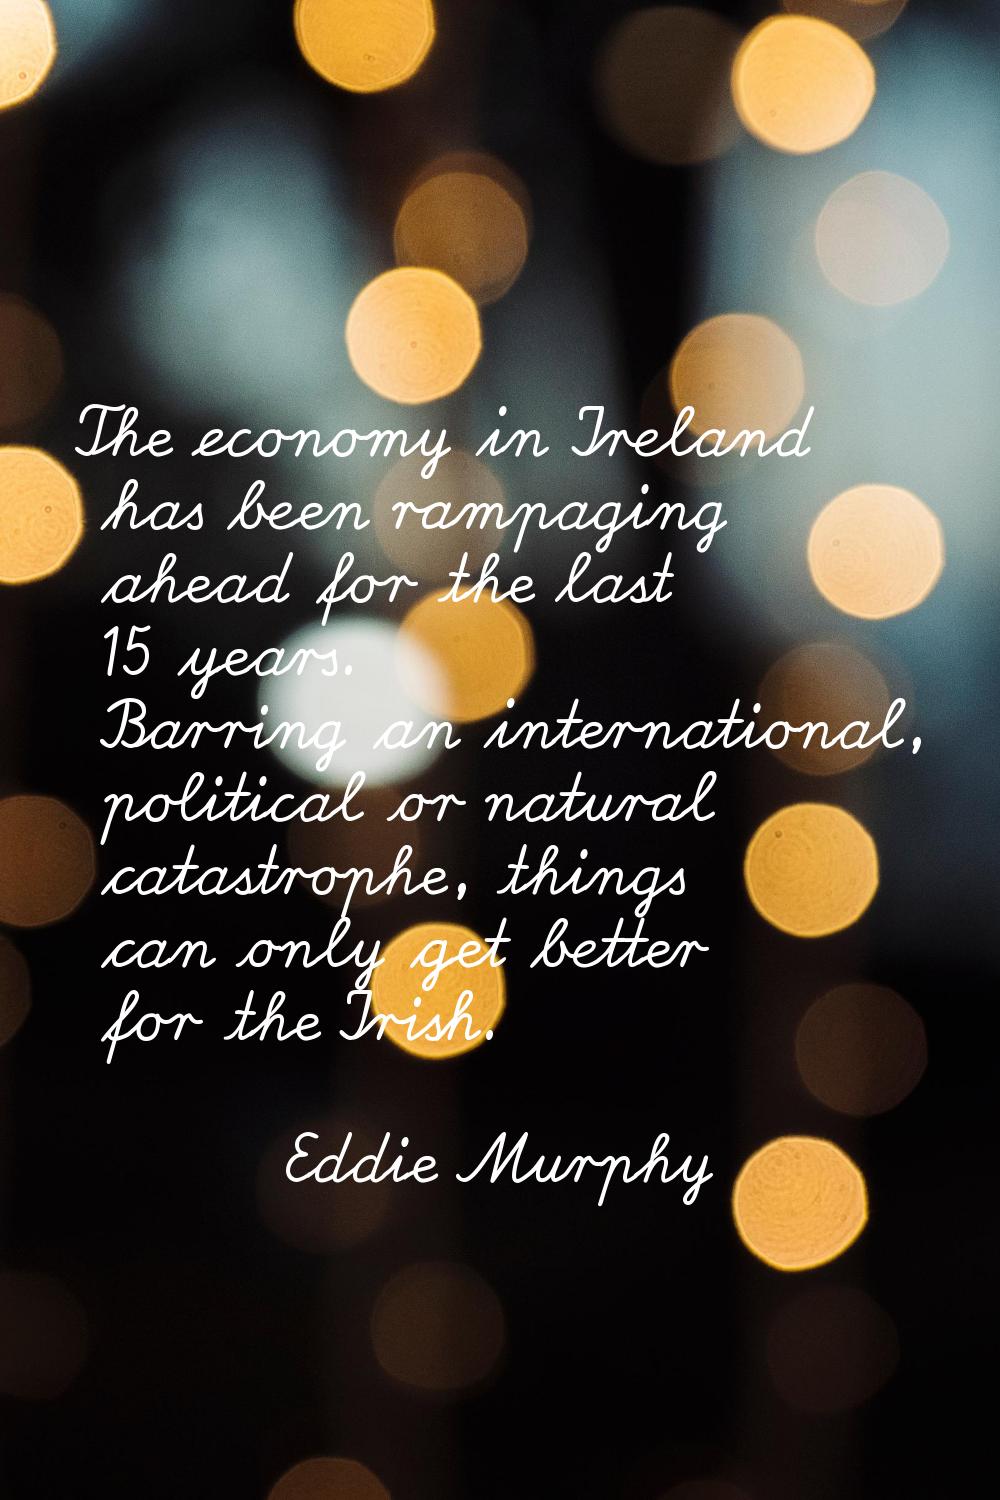 The economy in Ireland has been rampaging ahead for the last 15 years. Barring an international, po